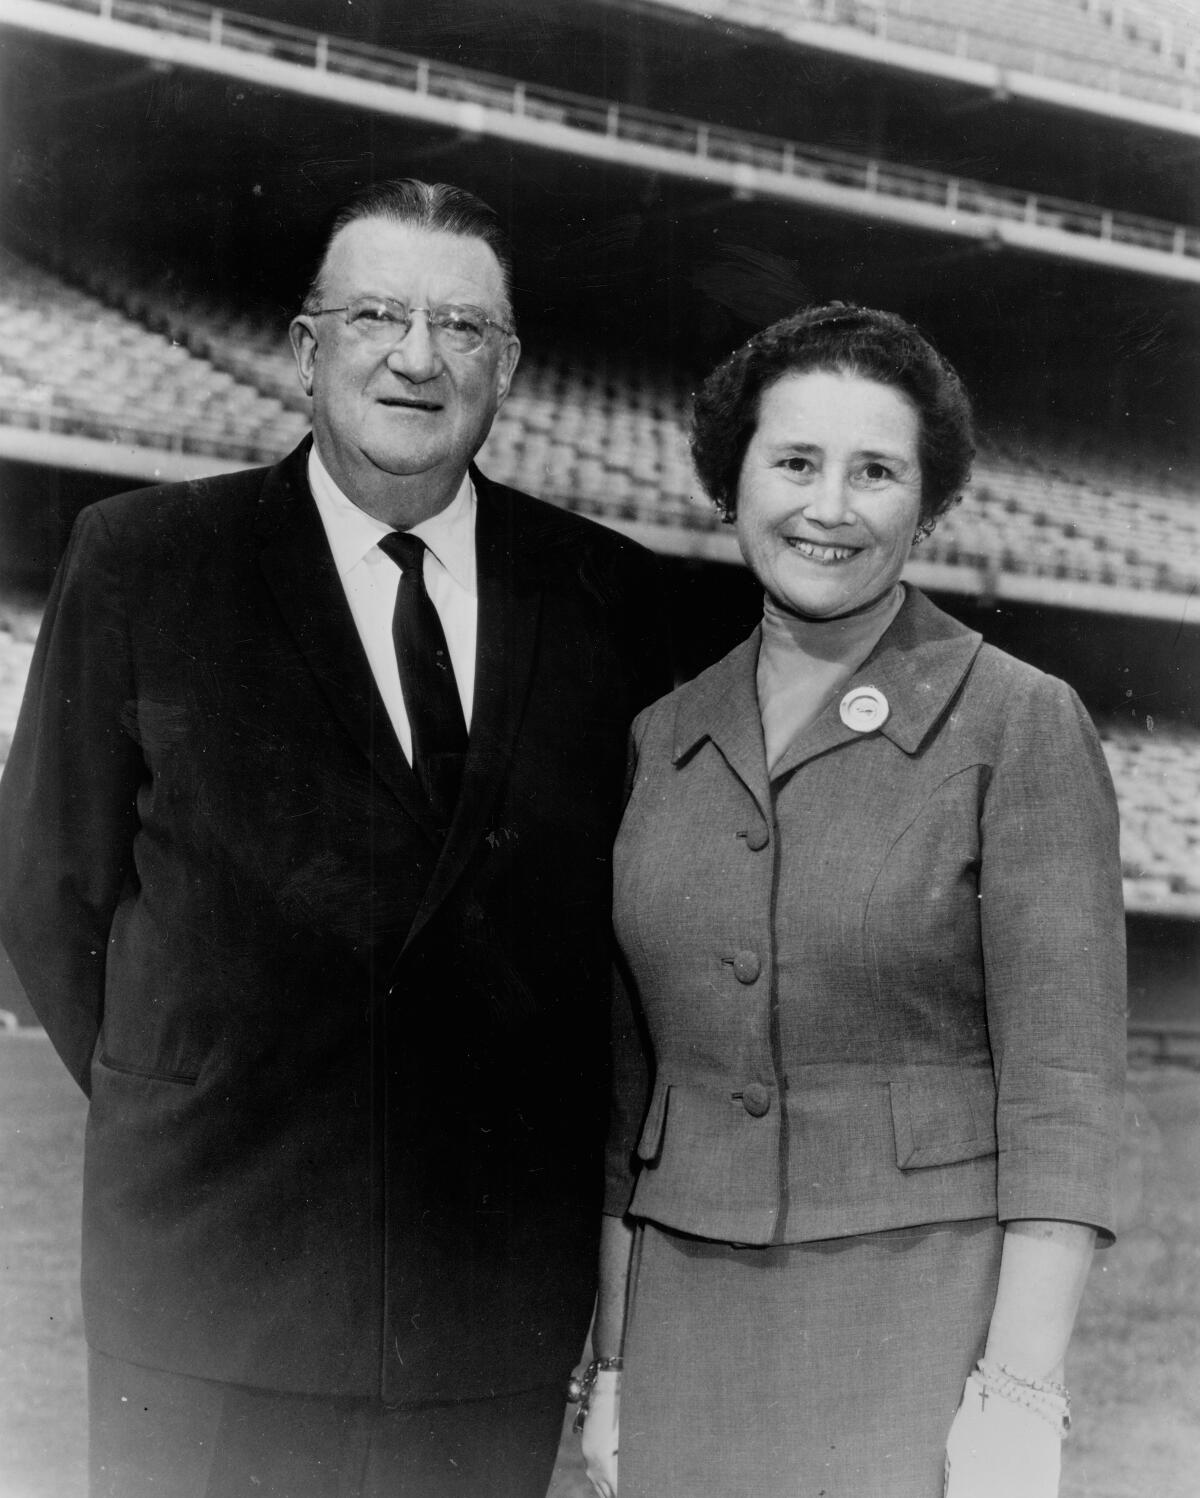 Walter O'Malley and his wife, Kay